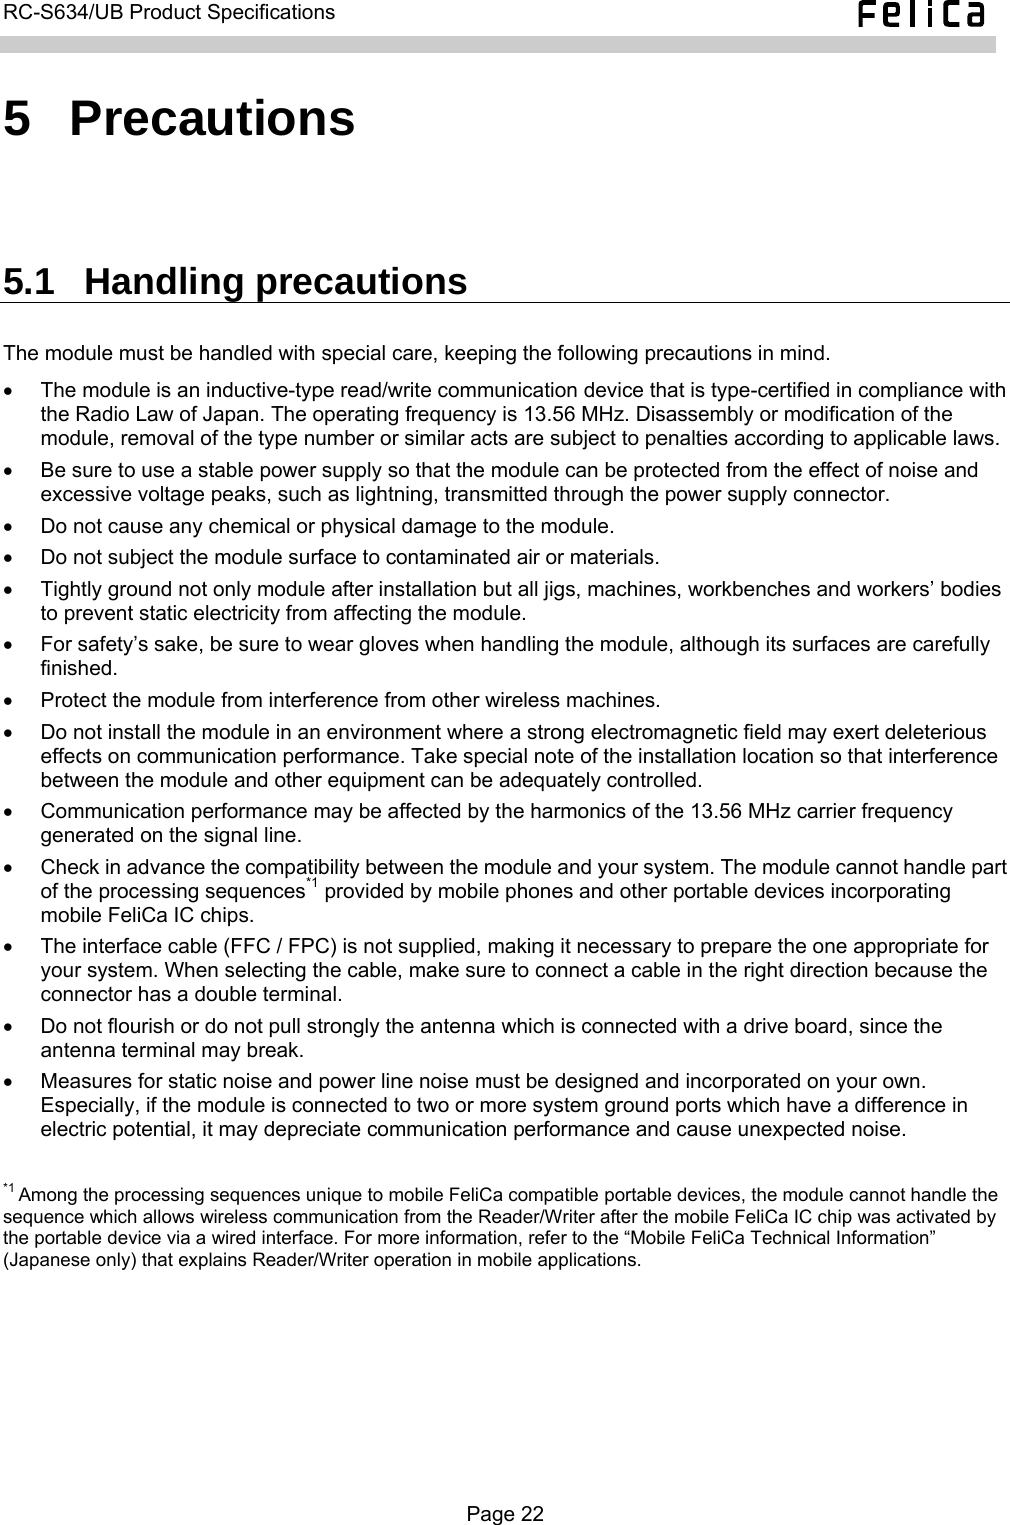   RC-S634/UB Product Specifications  5  Precautions 5.1  Handling precautions The module must be handled with special care, keeping the following precautions in mind. •  The module is an inductive-type read/write communication device that is type-certified in compliance with the Radio Law of Japan. The operating frequency is 13.56 MHz. Disassembly or modification of the module, removal of the type number or similar acts are subject to penalties according to applicable laws. •  Be sure to use a stable power supply so that the module can be protected from the effect of noise and excessive voltage peaks, such as lightning, transmitted through the power supply connector. •  Do not cause any chemical or physical damage to the module. •  Do not subject the module surface to contaminated air or materials. •  Tightly ground not only module after installation but all jigs, machines, workbenches and workers’ bodies to prevent static electricity from affecting the module. •  For safety’s sake, be sure to wear gloves when handling the module, although its surfaces are carefully finished. •  Protect the module from interference from other wireless machines. •  Do not install the module in an environment where a strong electromagnetic field may exert deleterious effects on communication performance. Take special note of the installation location so that interference between the module and other equipment can be adequately controlled. •  Communication performance may be affected by the harmonics of the 13.56 MHz carrier frequency generated on the signal line. •  Check in advance the compatibility between the module and your system. The module cannot handle part of the processing sequences*1 provided by mobile phones and other portable devices incorporating mobile FeliCa IC chips. •  The interface cable (FFC / FPC) is not supplied, making it necessary to prepare the one appropriate for your system. When selecting the cable, make sure to connect a cable in the right direction because the connector has a double terminal. •  Do not flourish or do not pull strongly the antenna which is connected with a drive board, since the antenna terminal may break. •  Measures for static noise and power line noise must be designed and incorporated on your own. Especially, if the module is connected to two or more system ground ports which have a difference in electric potential, it may depreciate communication performance and cause unexpected noise.  *1 Among the processing sequences unique to mobile FeliCa compatible portable devices, the module cannot handle the sequence which allows wireless communication from the Reader/Writer after the mobile FeliCa IC chip was activated by the portable device via a wired interface. For more information, refer to the “Mobile FeliCa Technical Information” (Japanese only) that explains Reader/Writer operation in mobile applications.  Page 22  